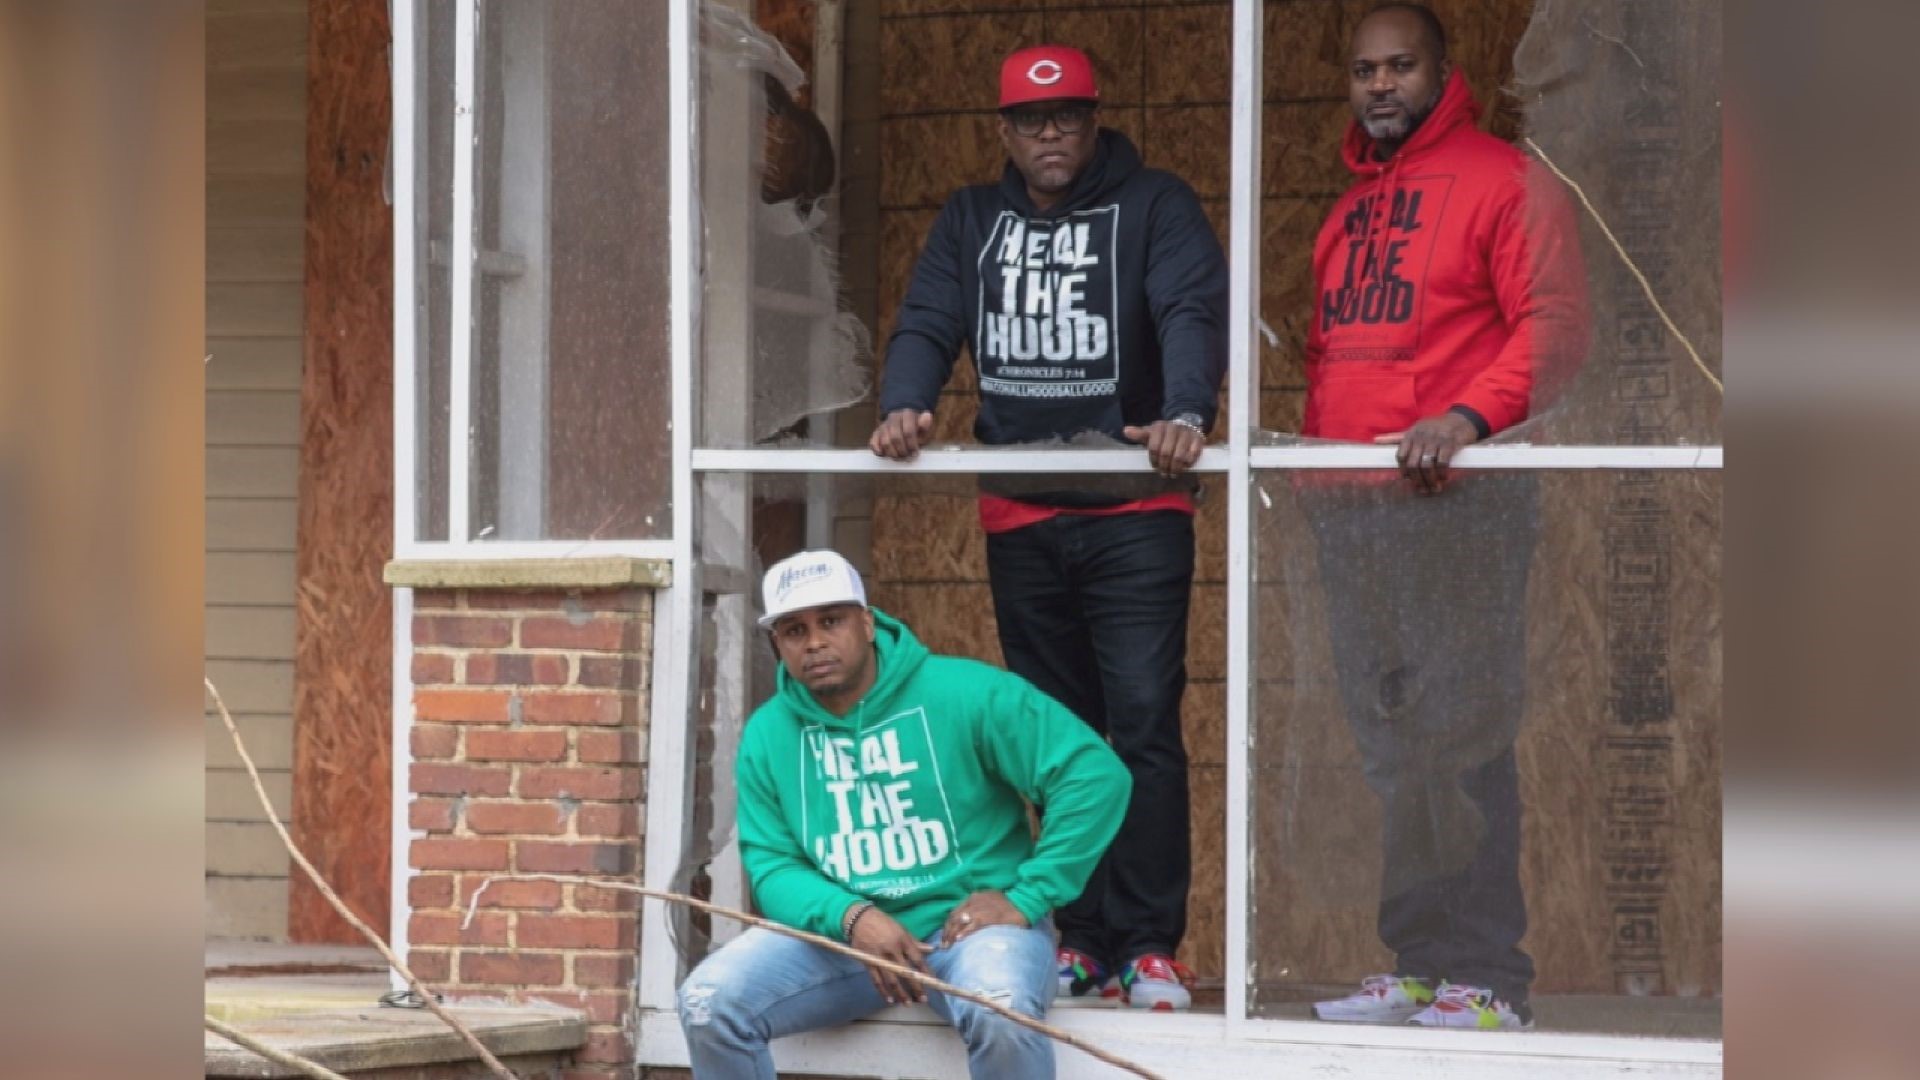 Three pastors from three different churches have come together with one goal in mind -- "Heal the Hood.” The initiative starts next week with a walk across Macon.